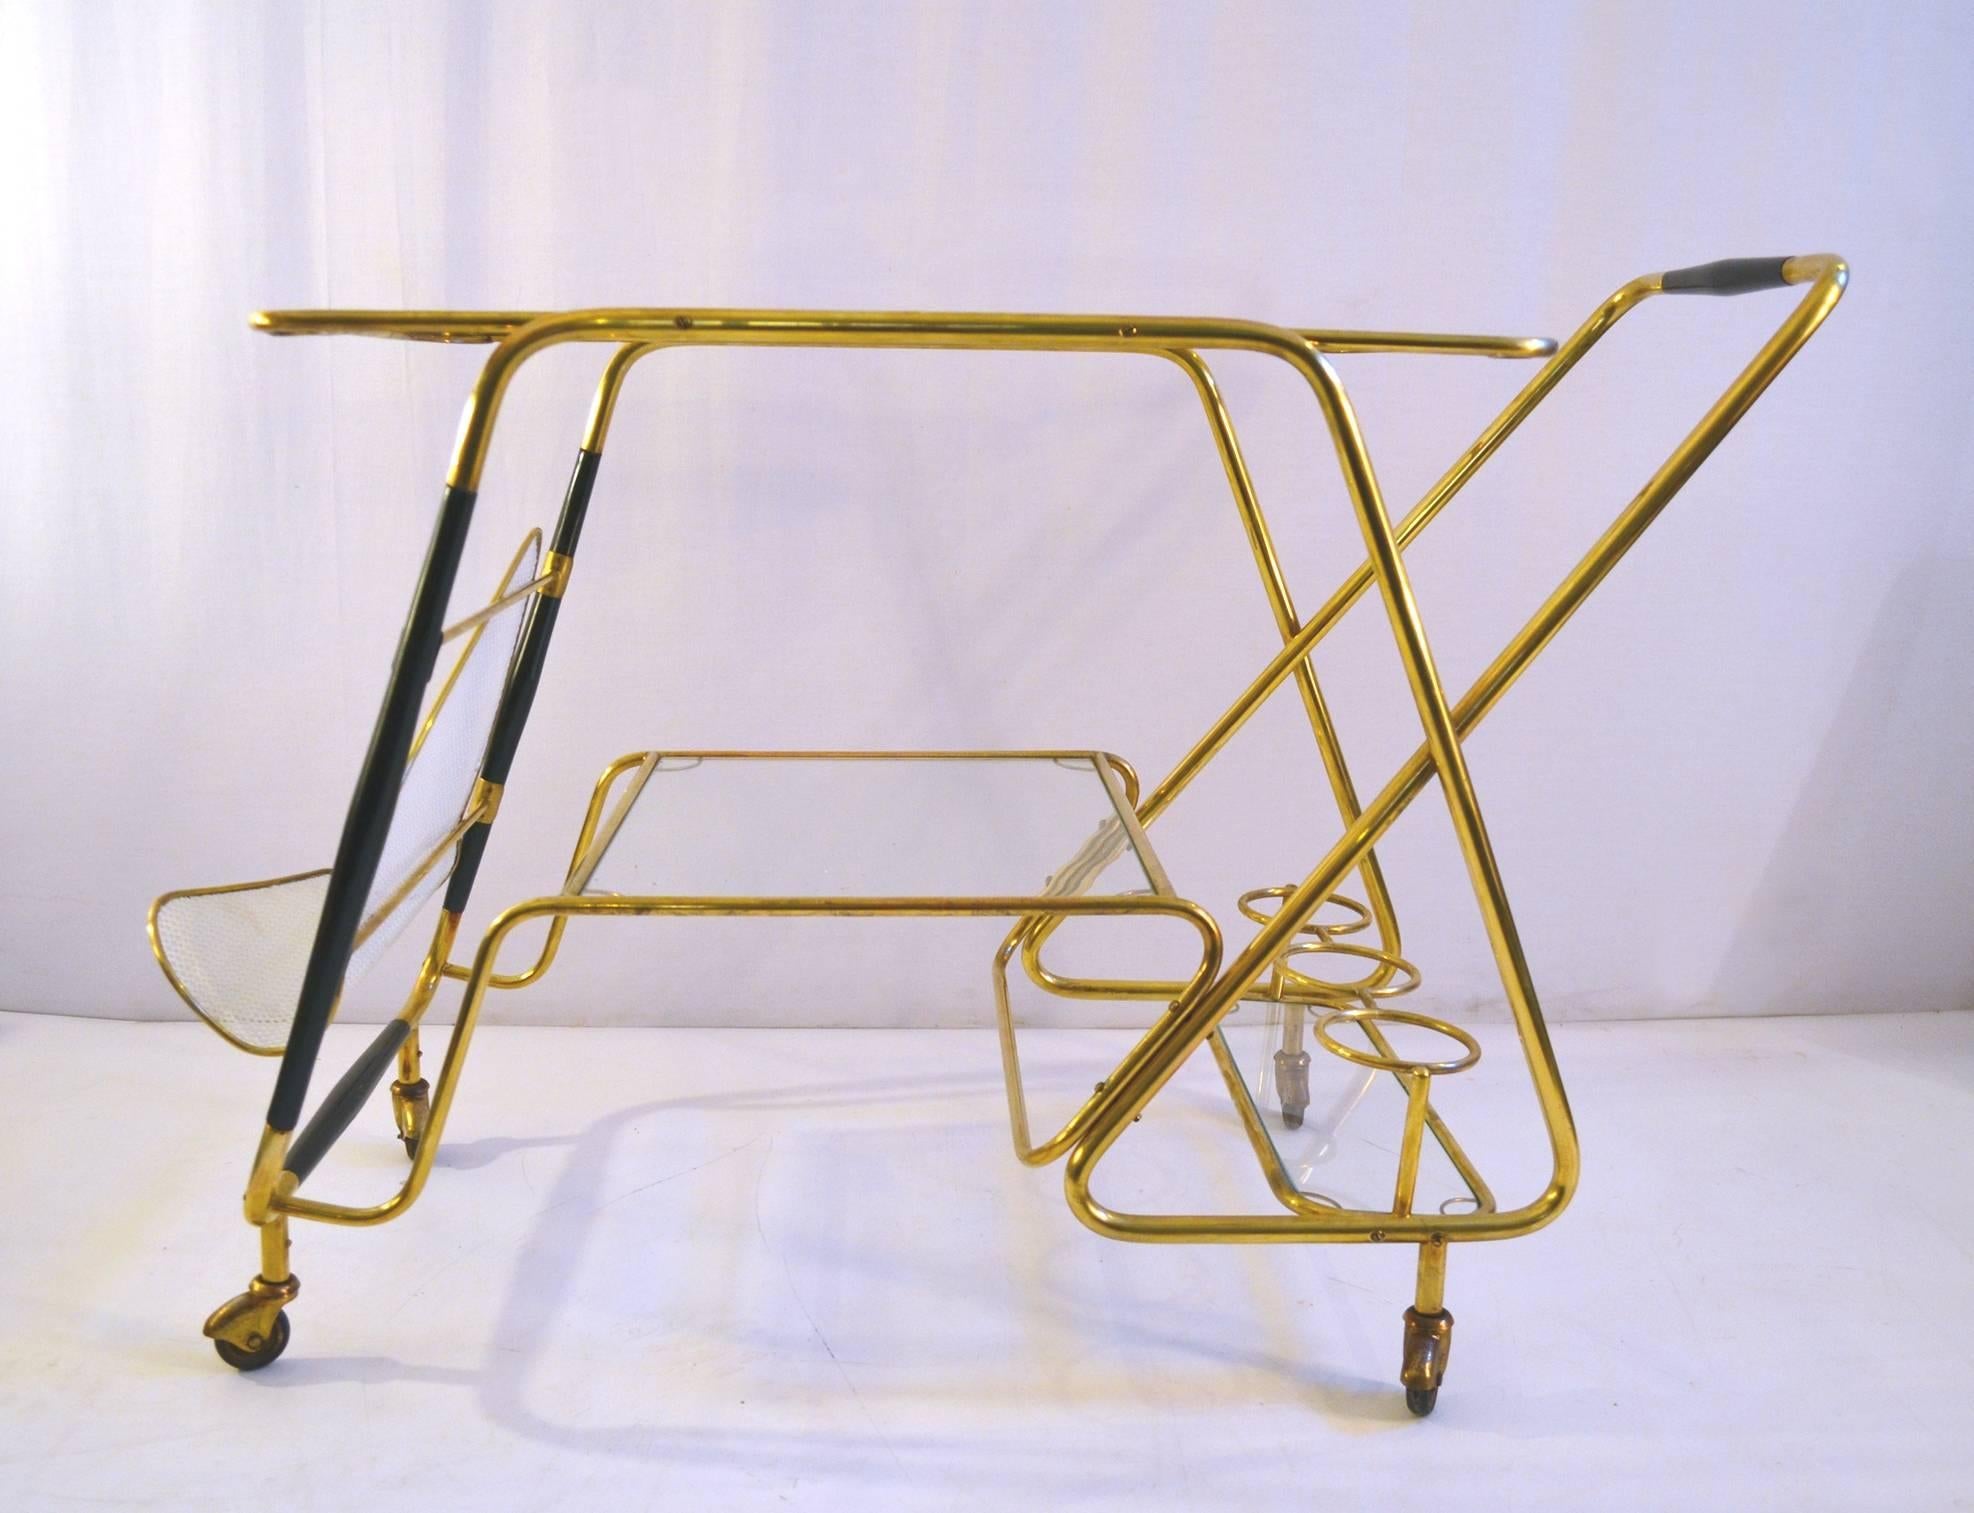 Unusual two-tiered bar cart with bottle holder as well as a magazine rack by Cesare Lacca, Italy, Made in brass and stained wood with clear glass trays. In excellent condition with wheels in good condition. Wood is restored and the brass polished.